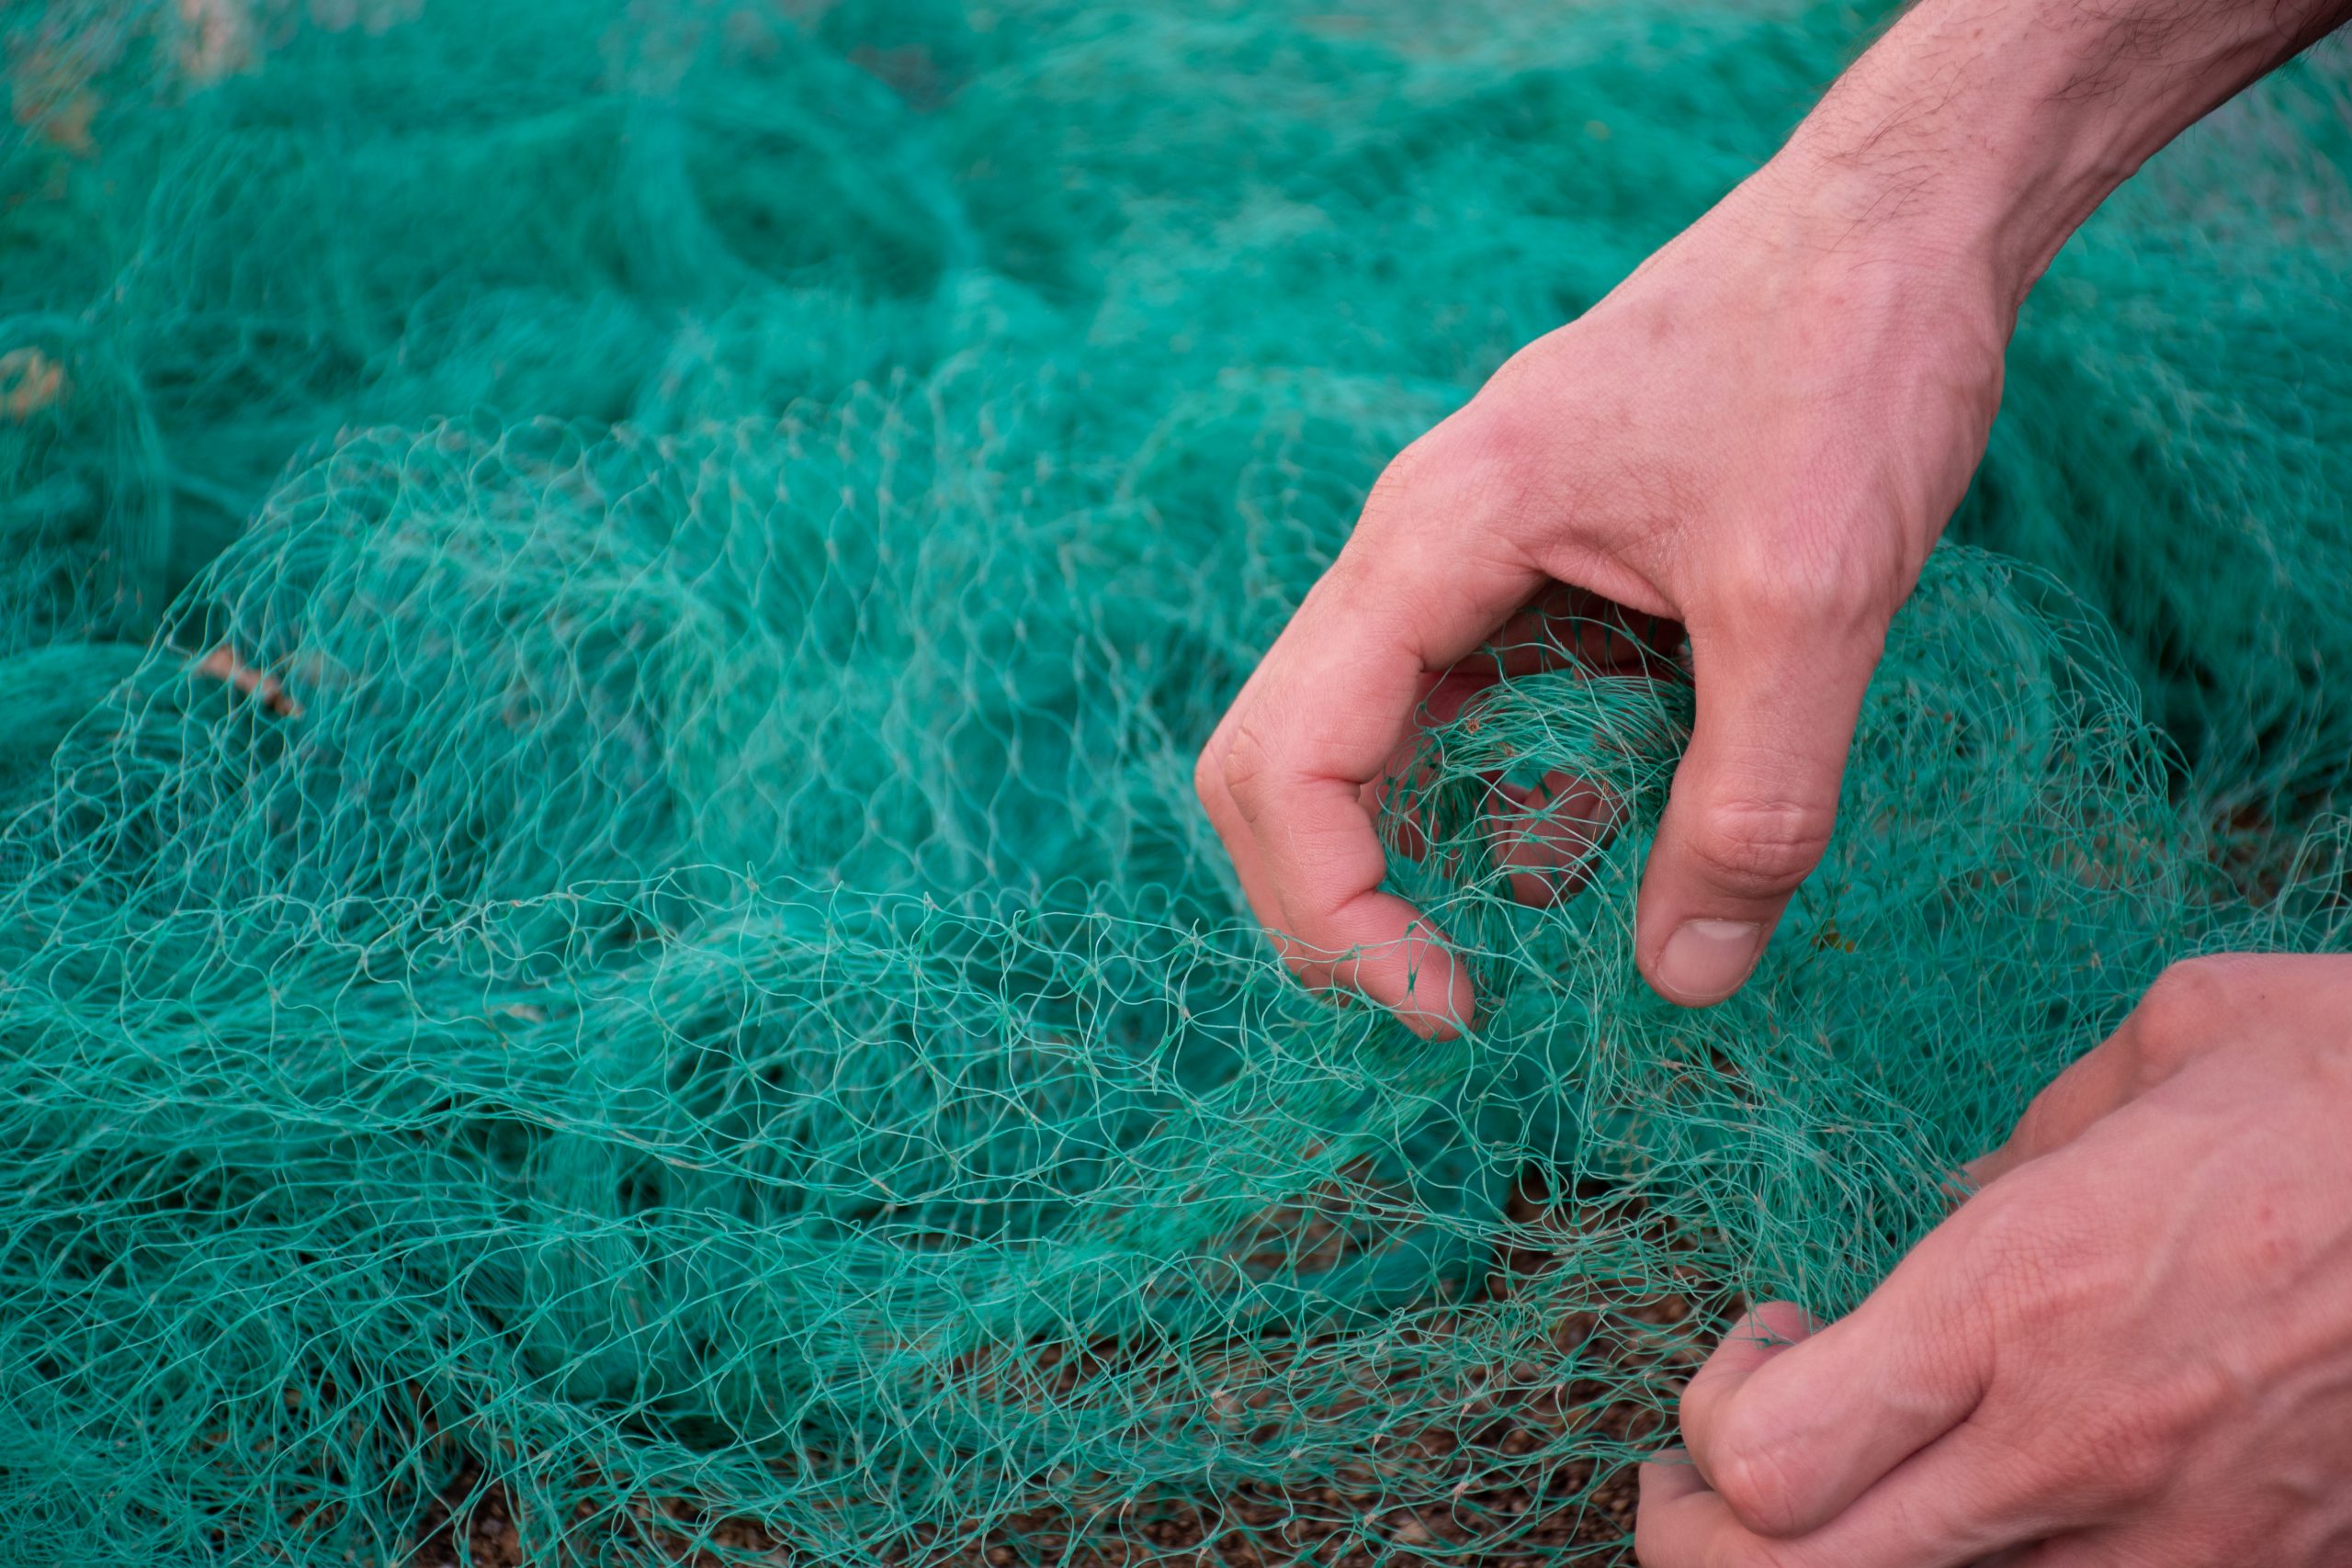 view-man-hands-picking-up-green-fishing-net-waste-nature-environmental-protection